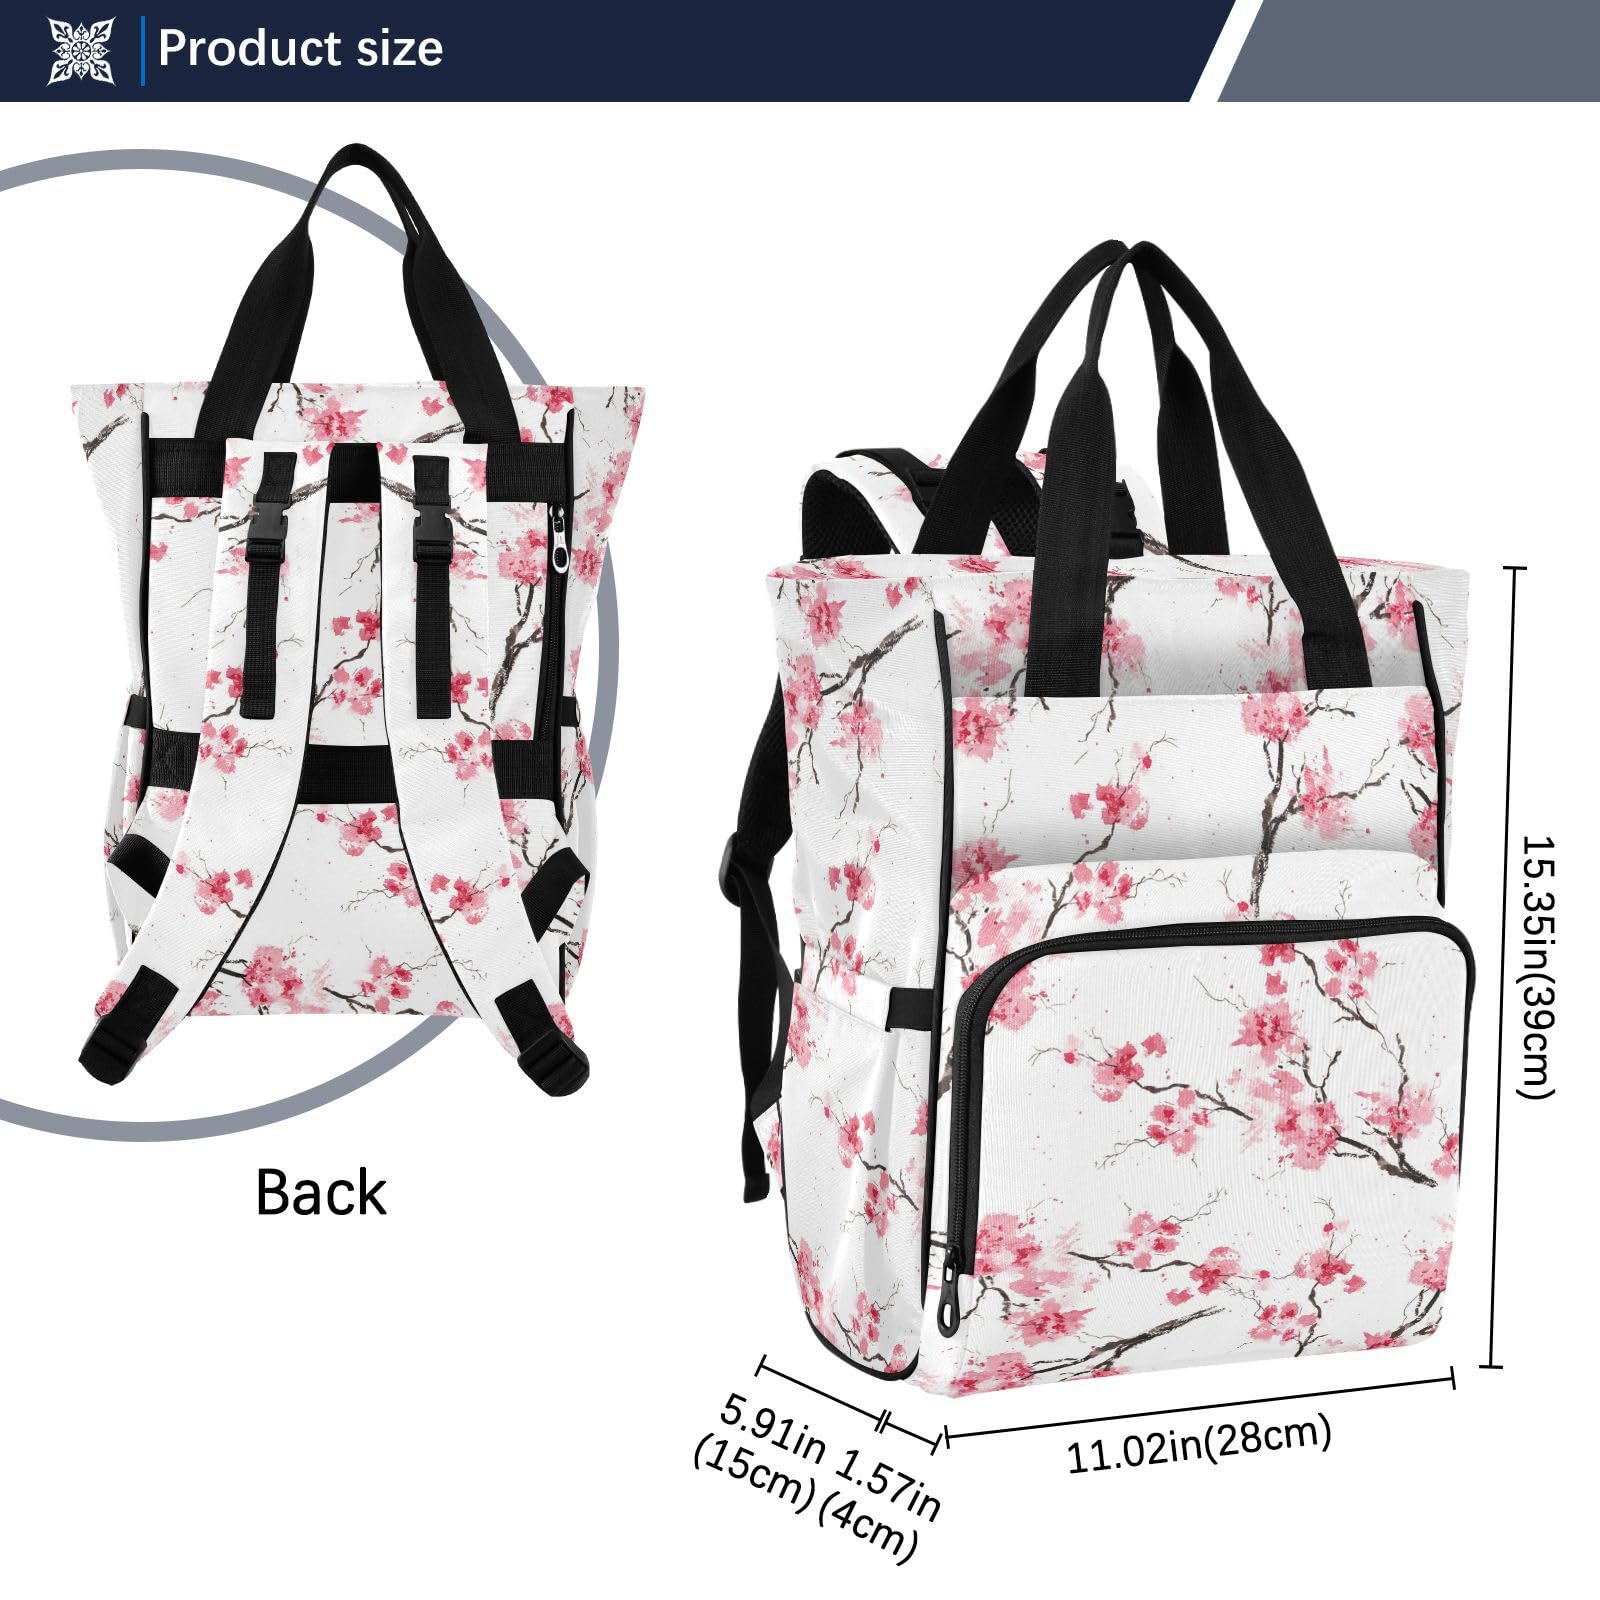 innewgogo Cherry Blossom Diaper Bag Backpack for Men Women Large Capacity Baby Changing Totes with Three Pockets Multifunction Baby Essentials for Picnicking Playing